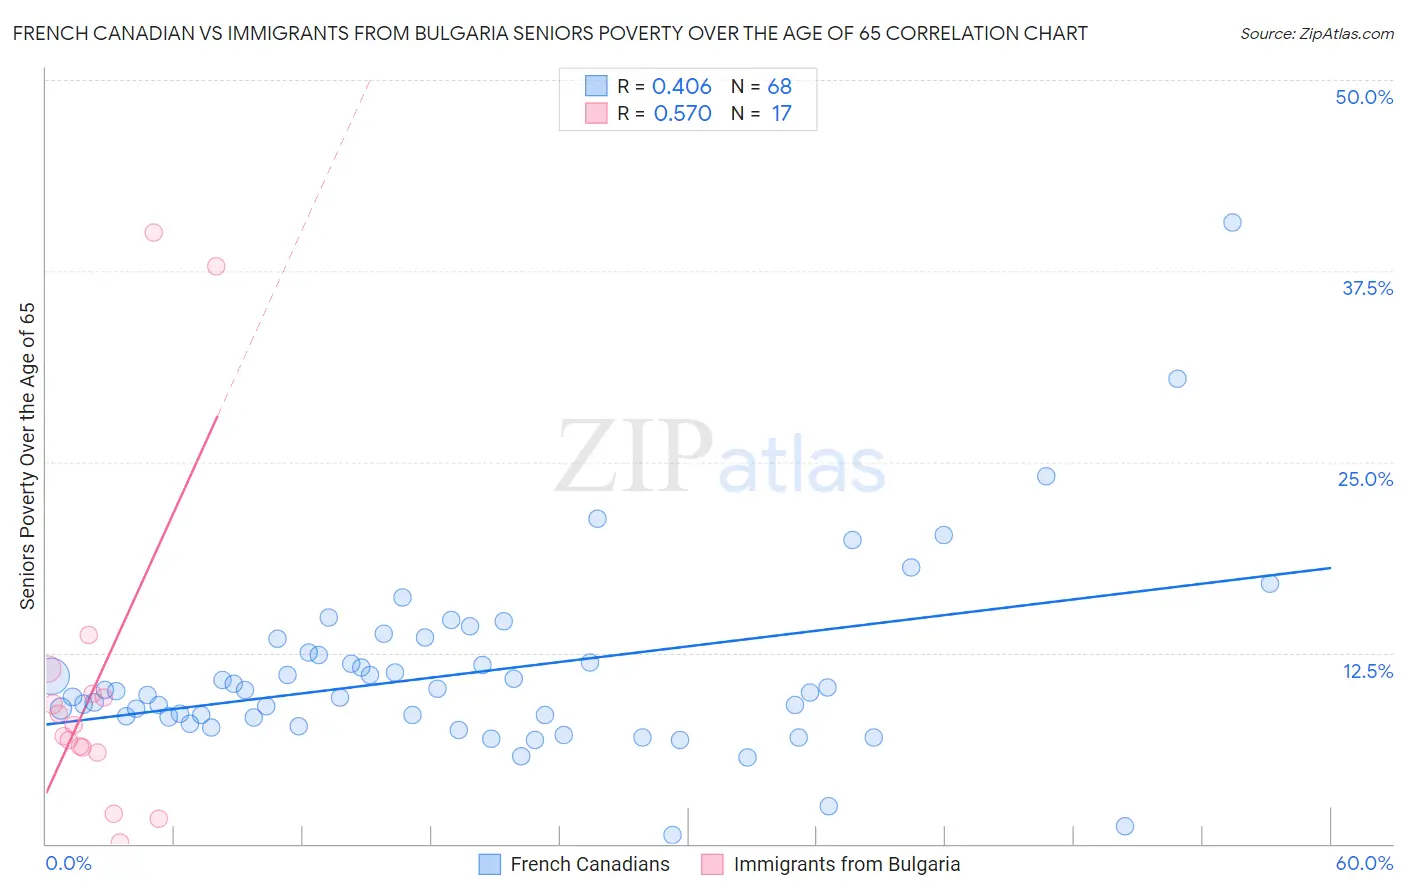 French Canadian vs Immigrants from Bulgaria Seniors Poverty Over the Age of 65